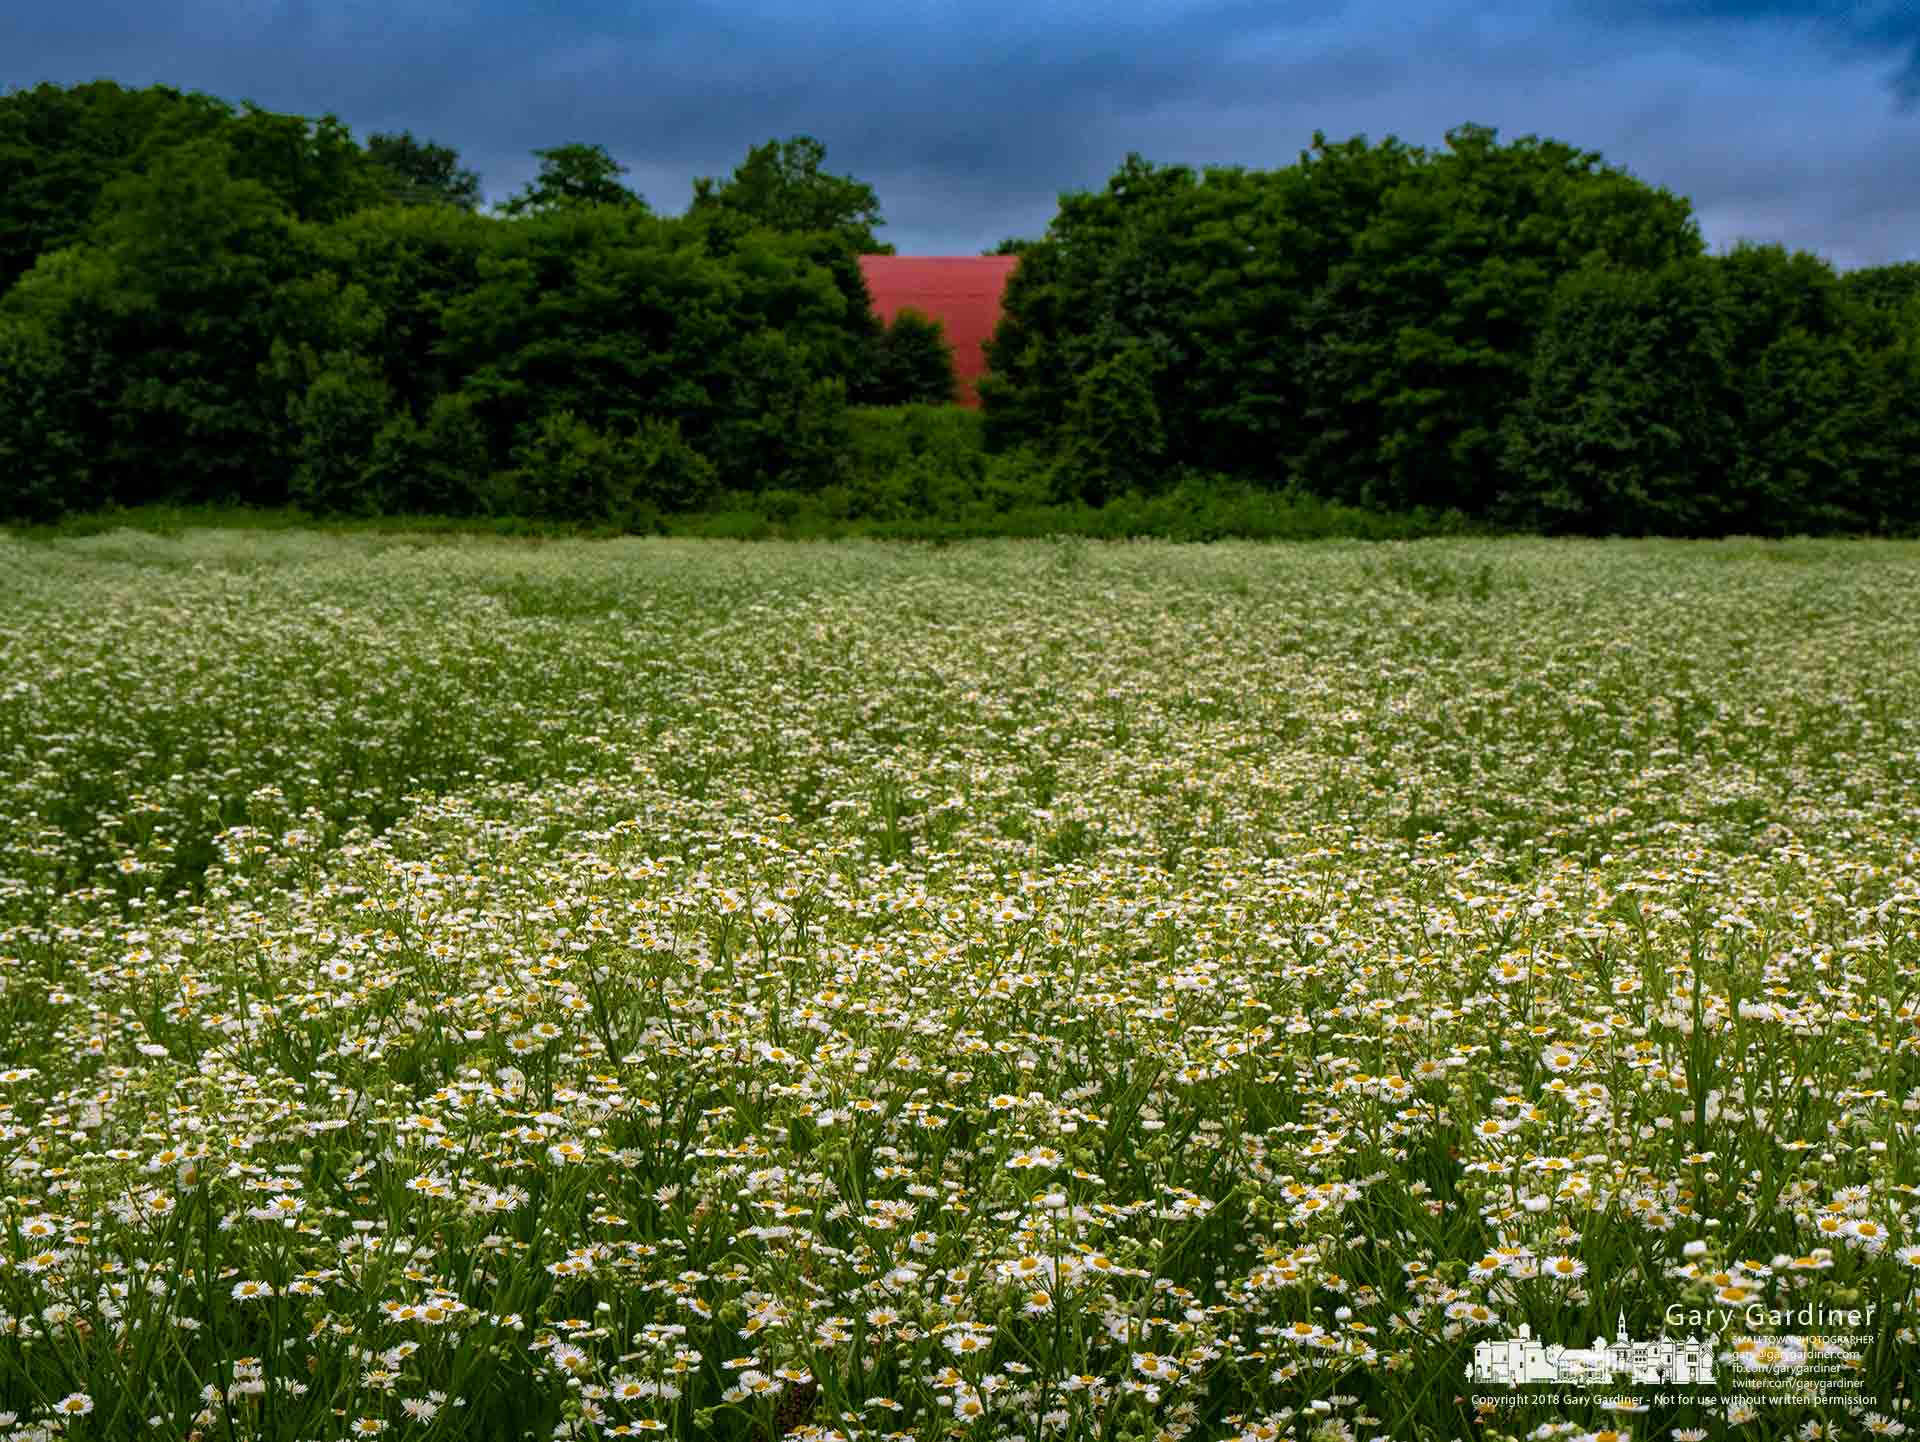 Stands of Daisy Fleabane begin to cover large sections of the Braun Farm fields where farmers have yet to till and plant a summer crop. My Final Photo for June 11, 2018.